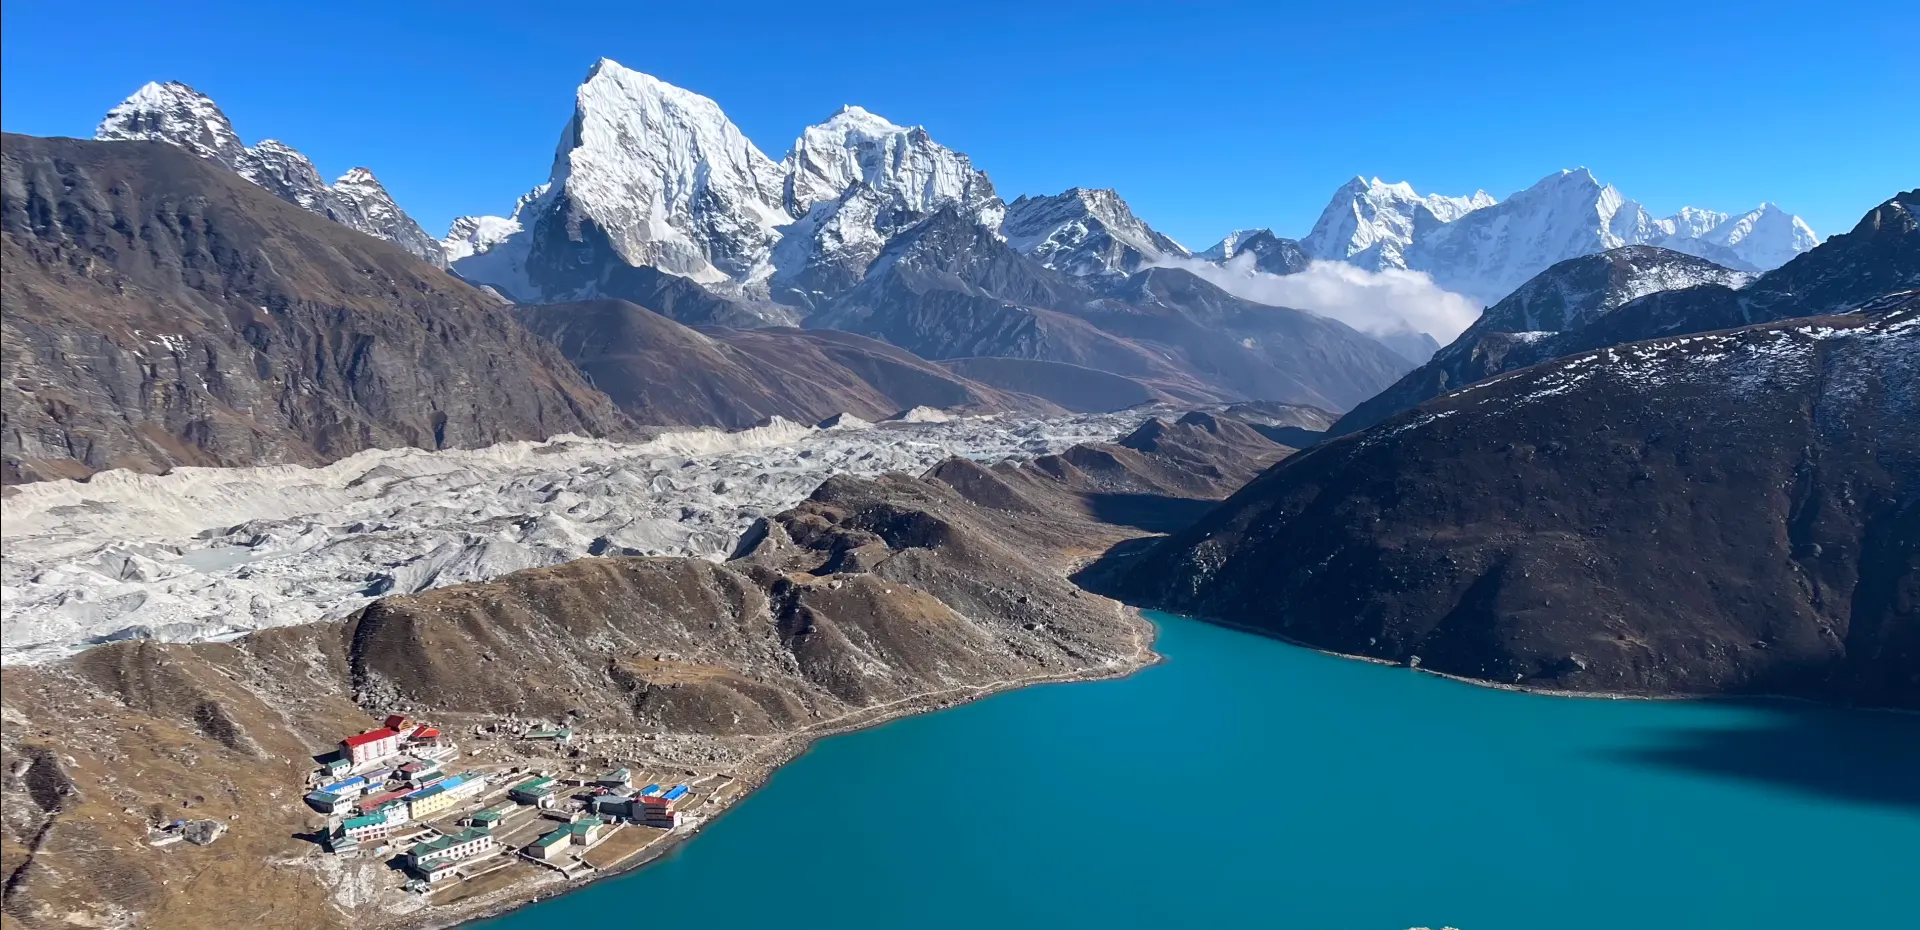 Gokyo Valley from top